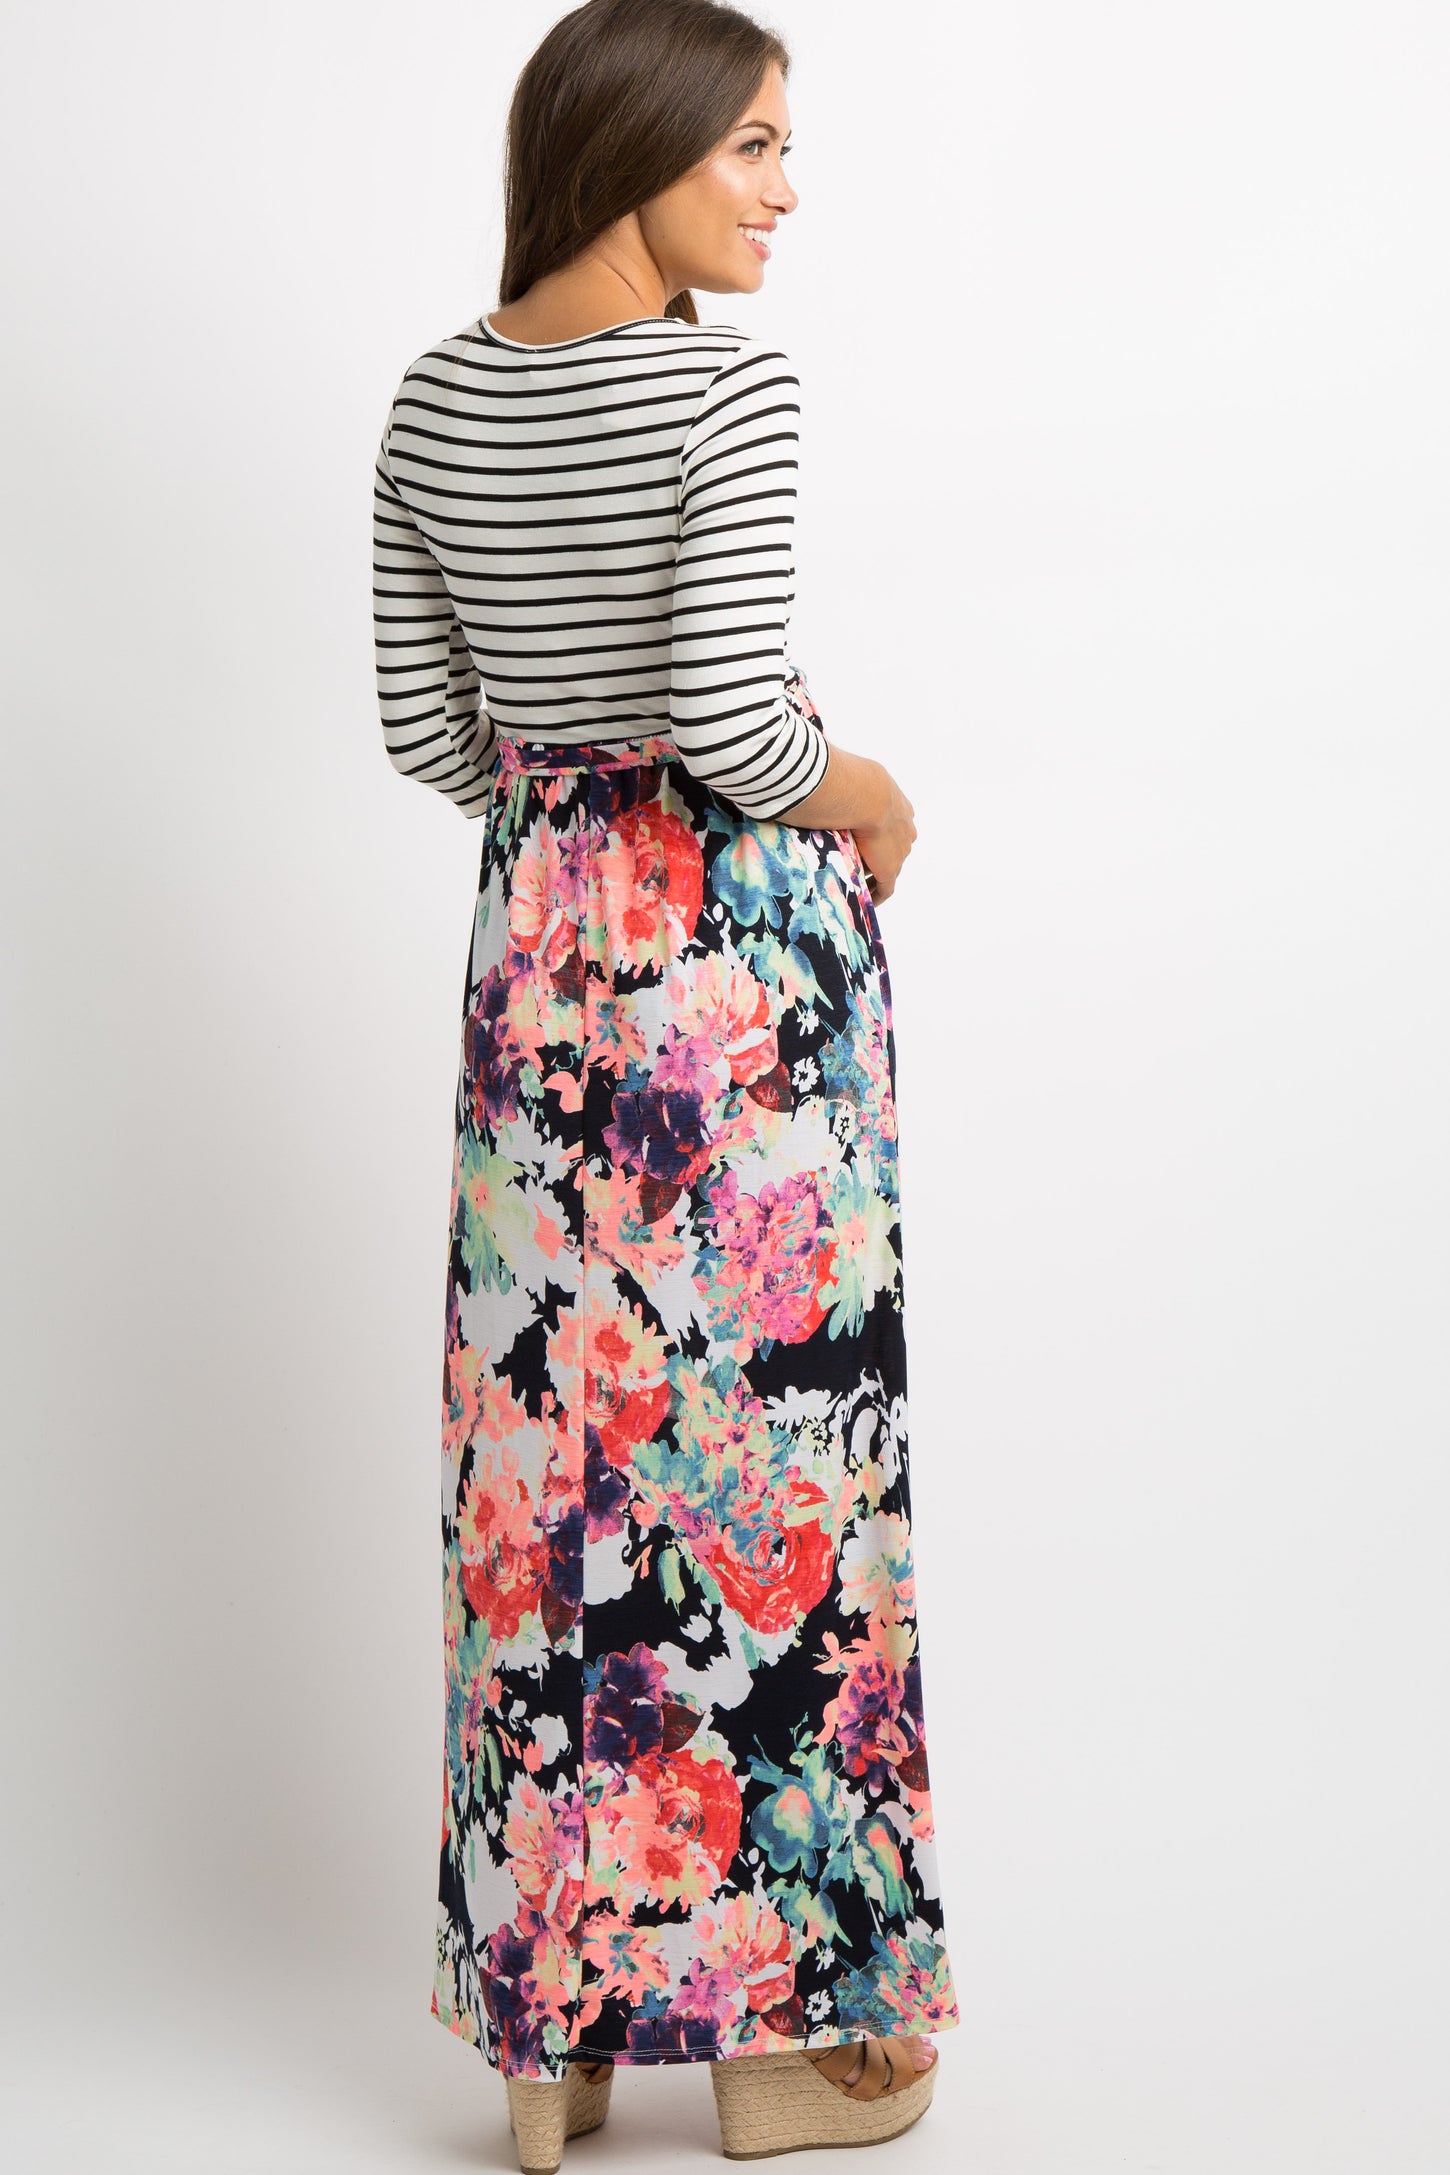 PinkBlush Navy Blue Neon Floral Striped Colorblock Maternity Maxi